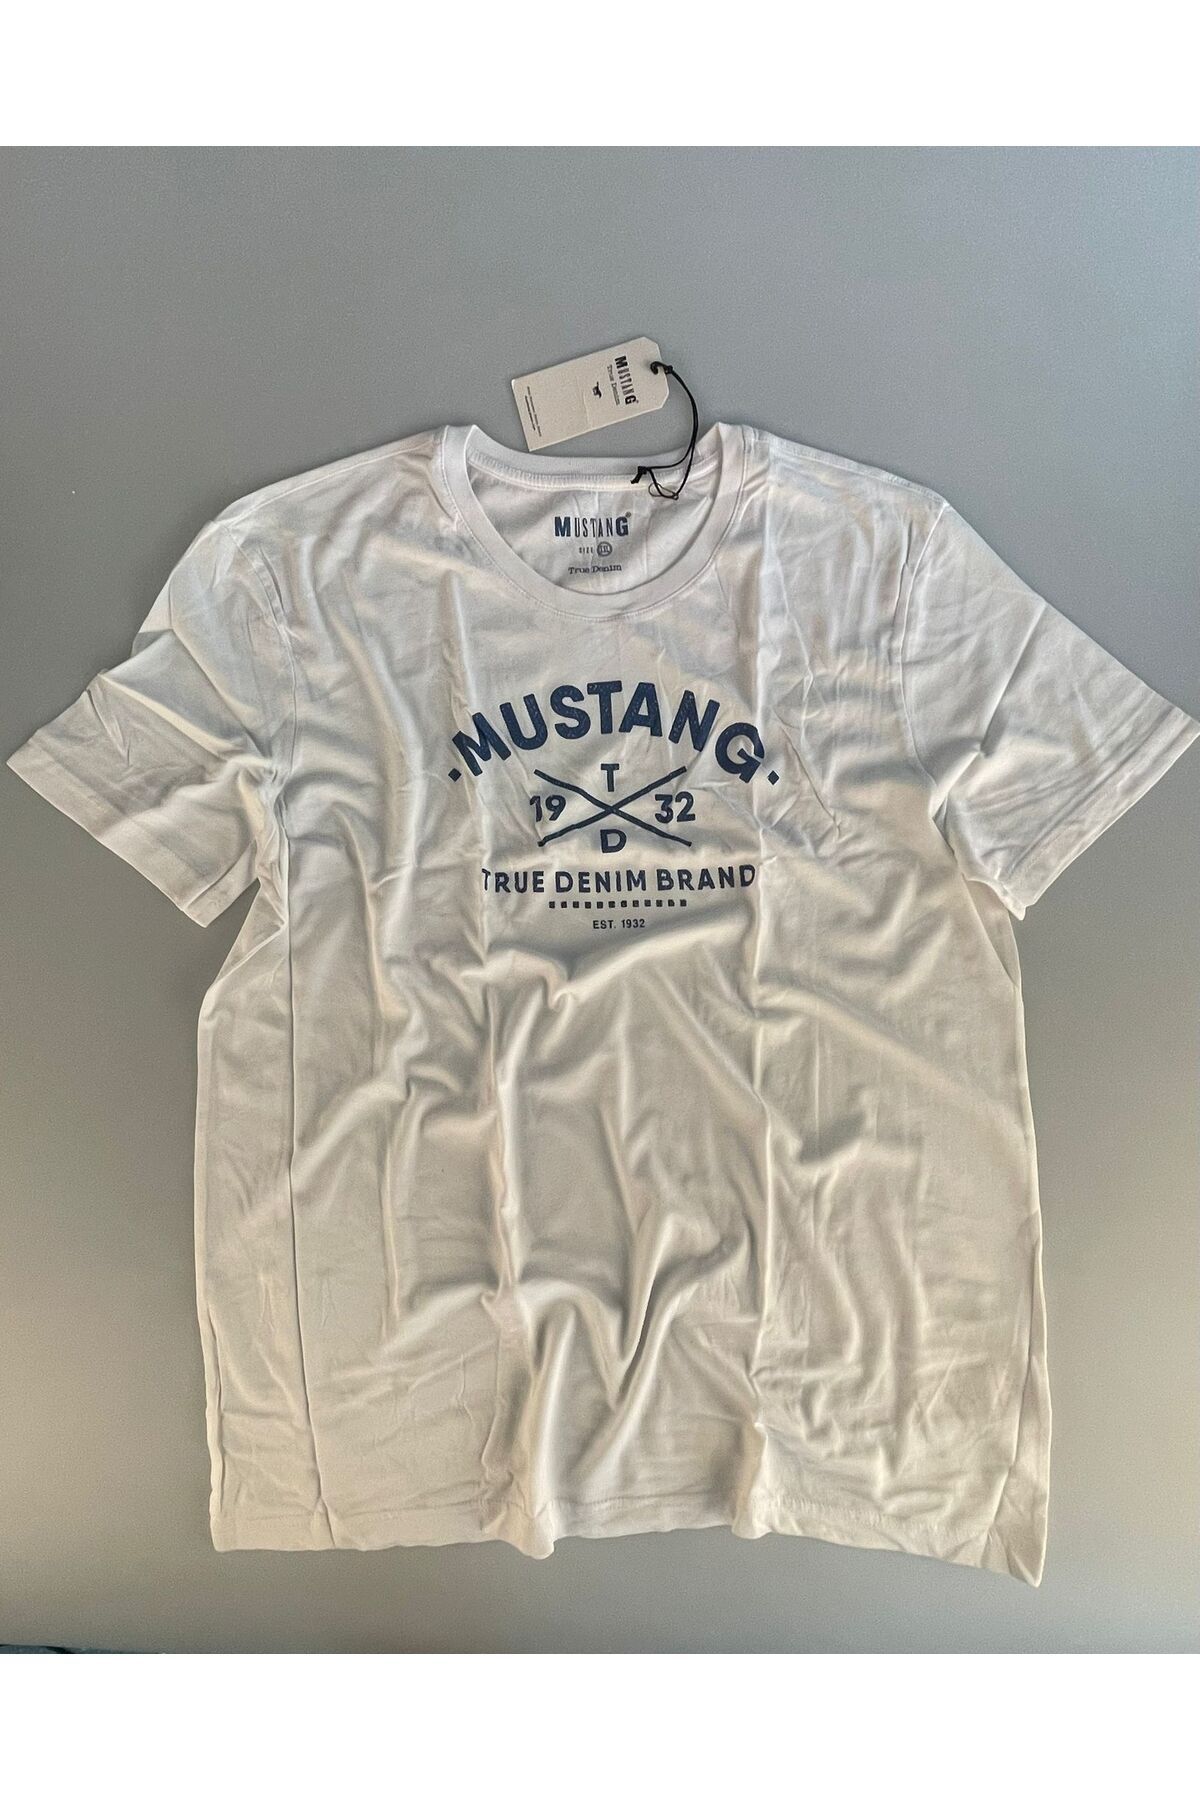 Mustang JEANS,T-SHİRT